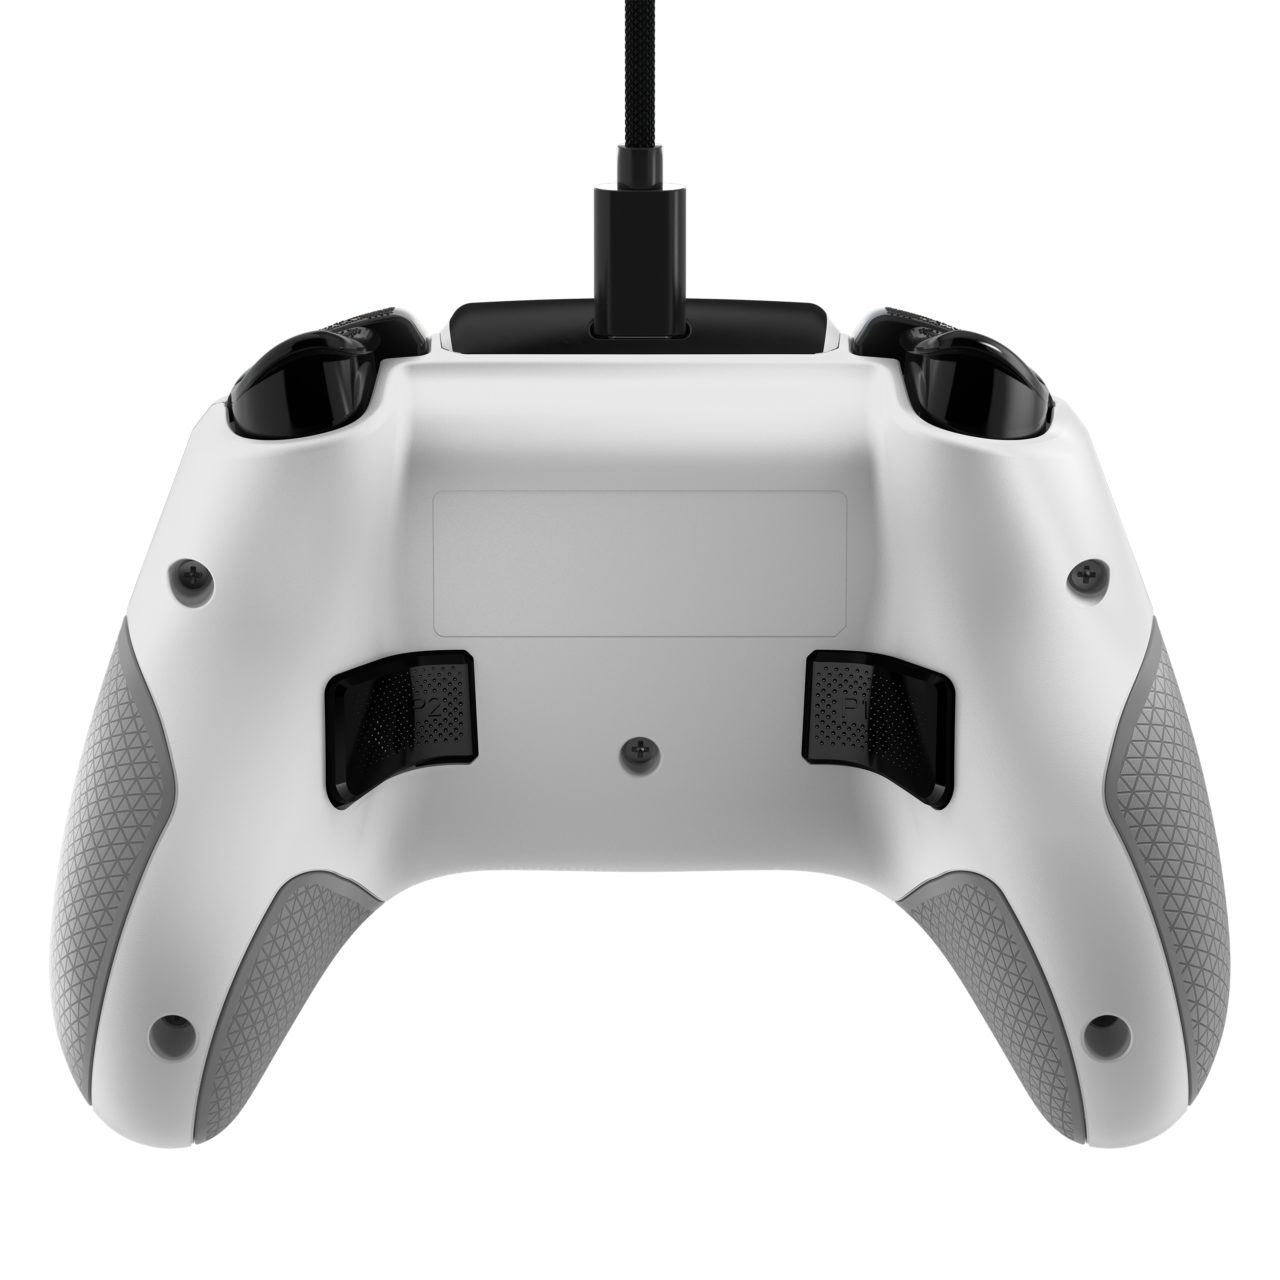 Recon Controller product image (Turtle Beach)